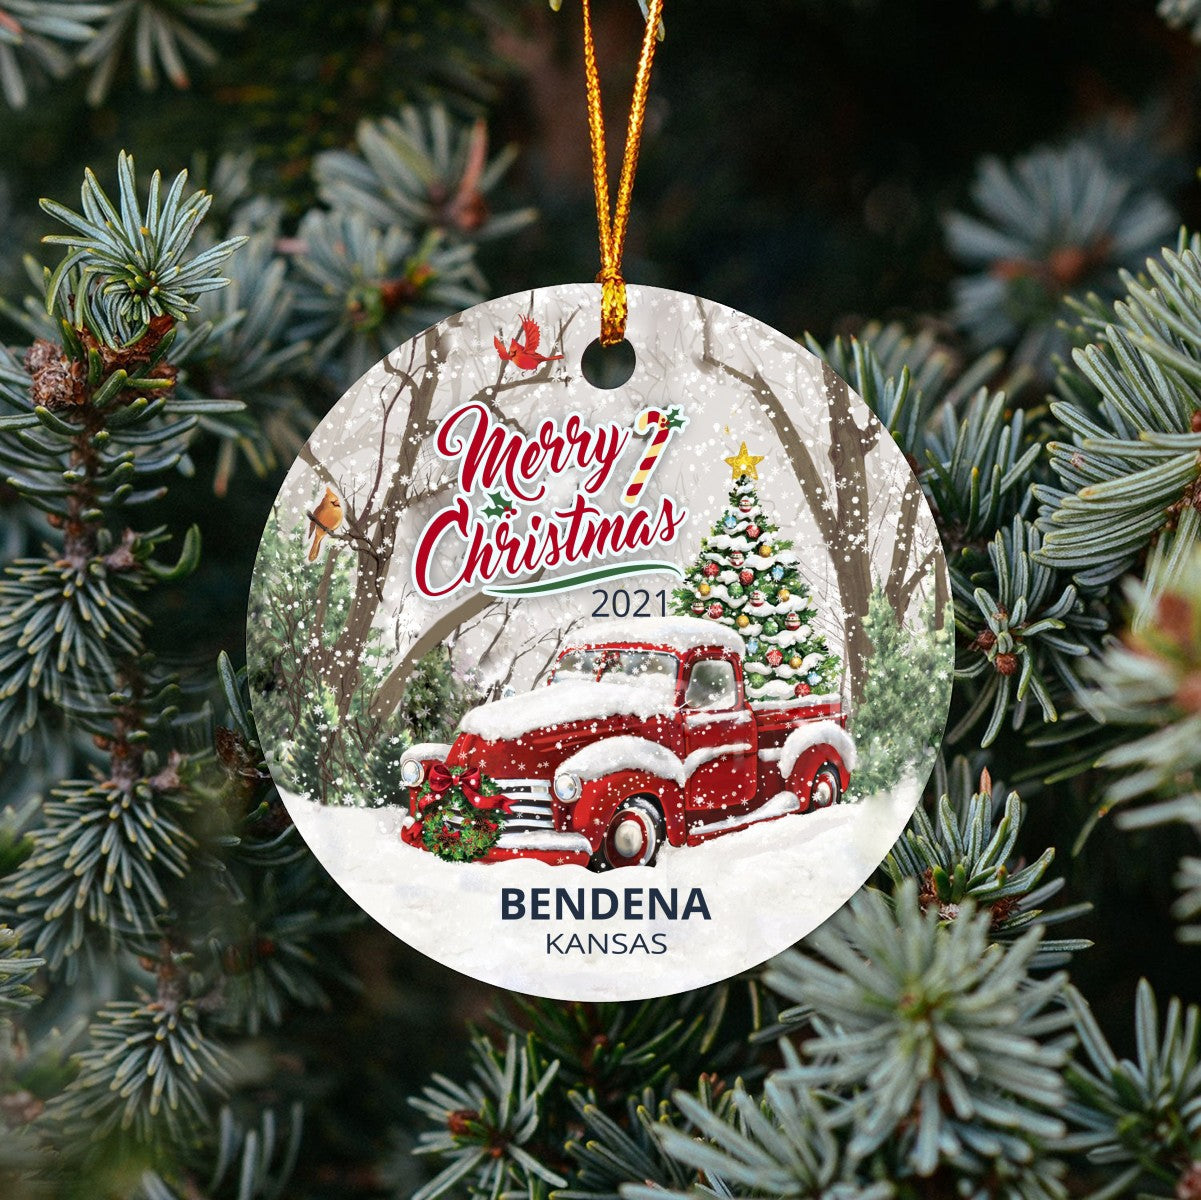 Christmas Tree Ornaments Bendena - Ornament With Name City, State Bendena Kansas KS Ornament - Red Truck Xmas Ornaments 3'' Plastic Gift For Family, Friend And Housewarming